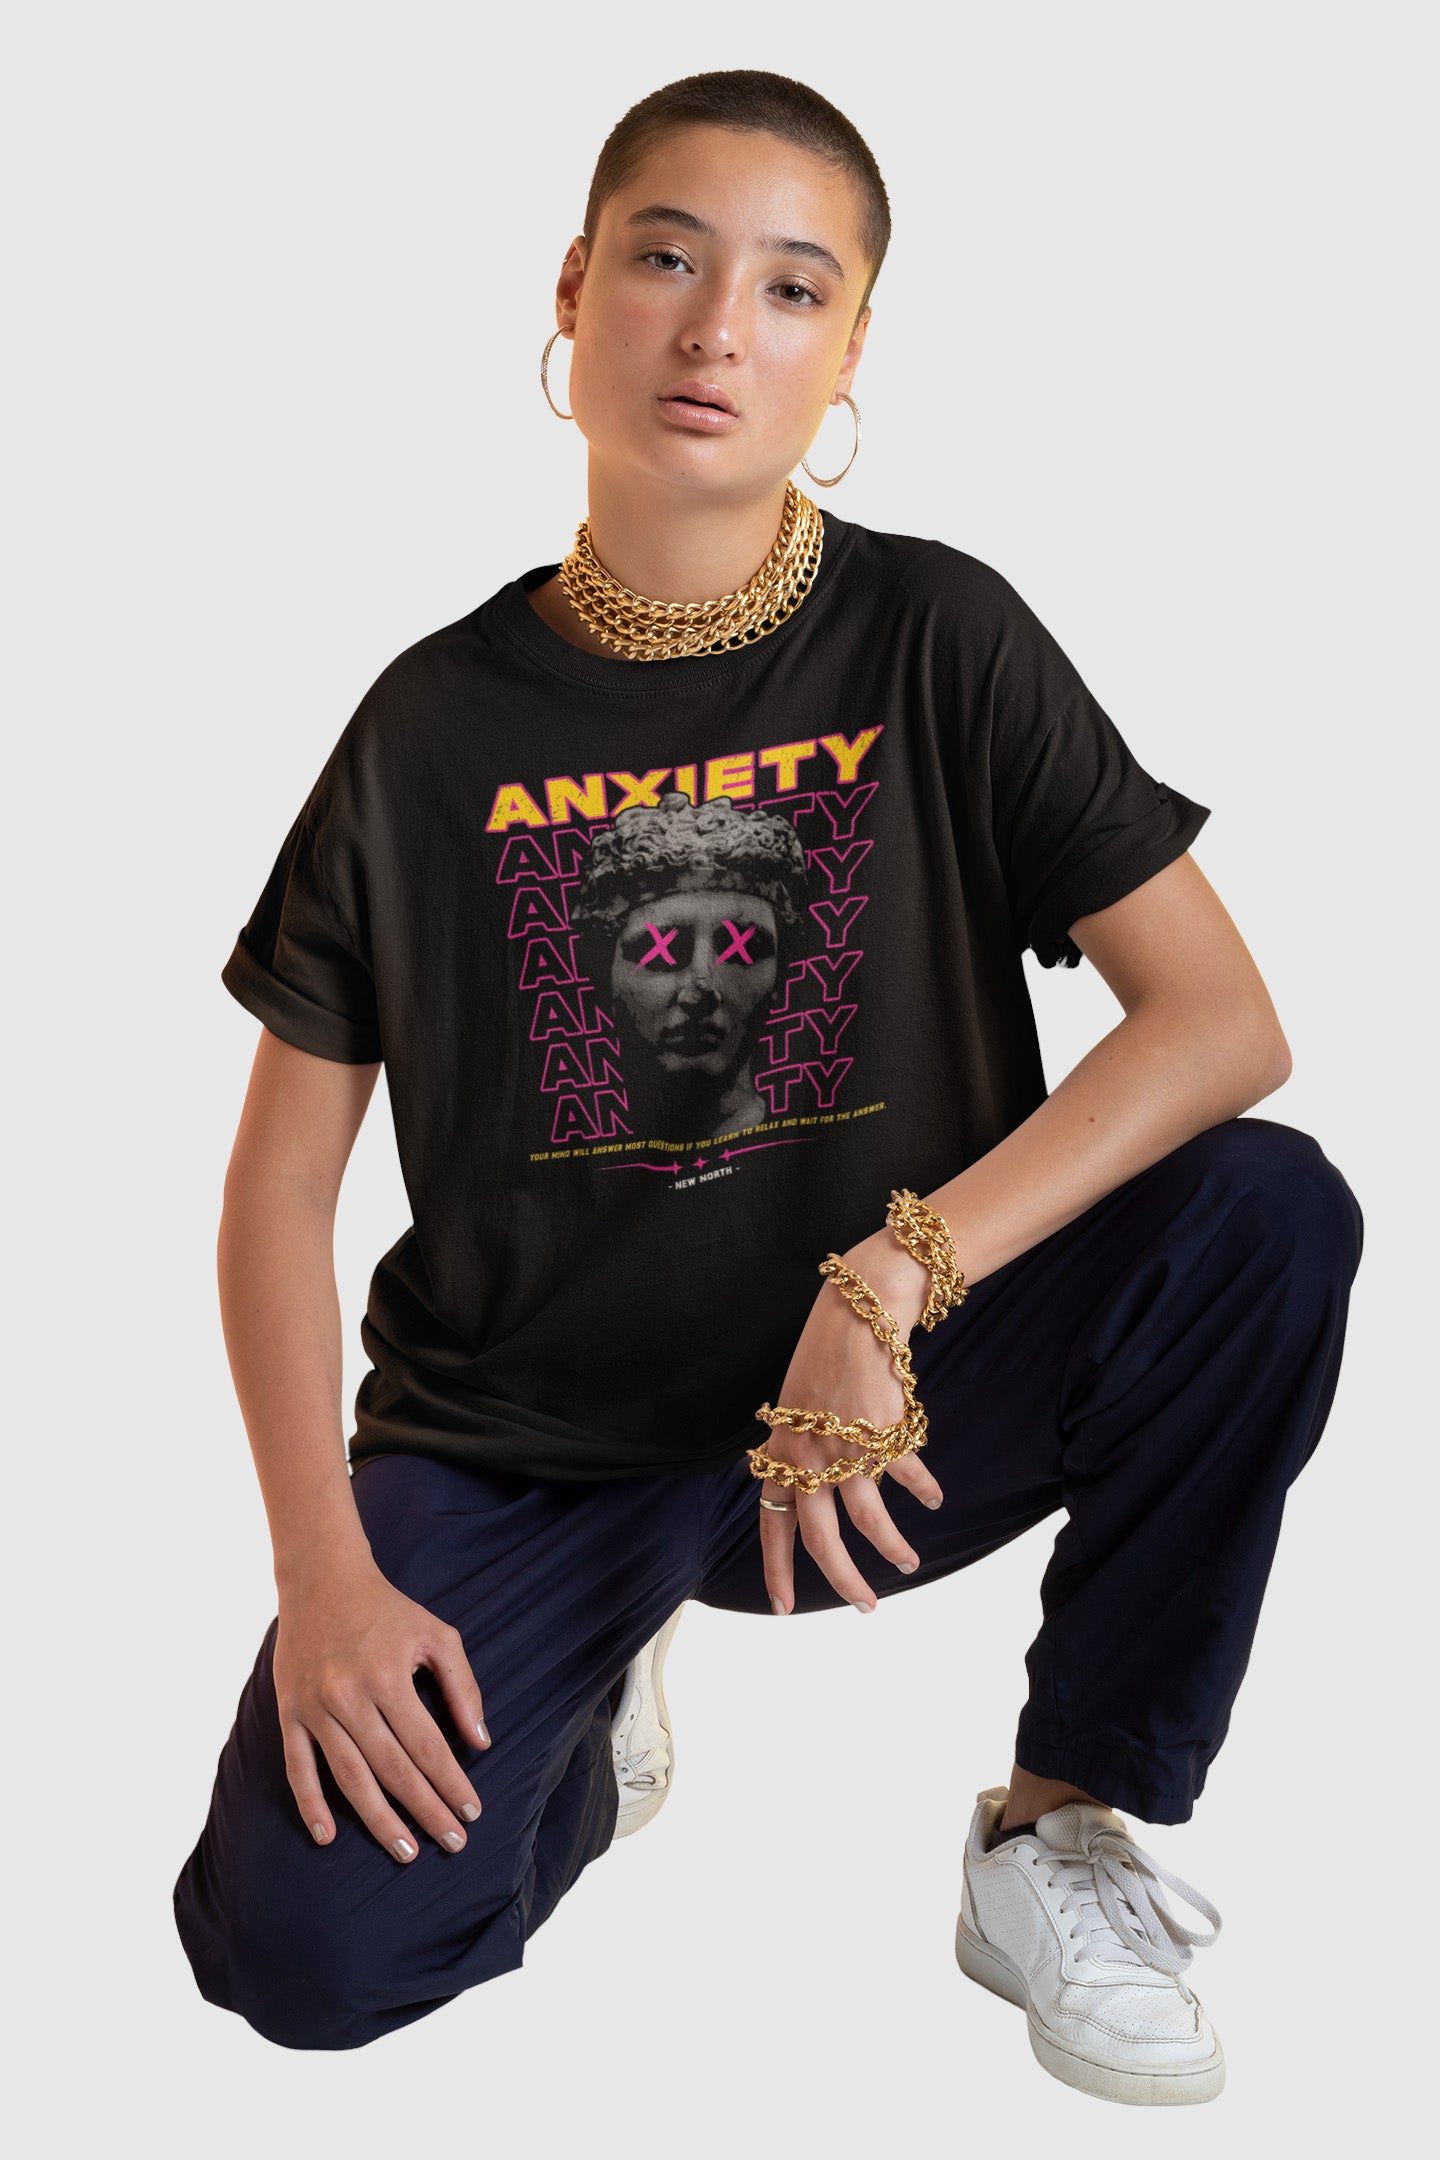 New Anxiety Relaxed T-shirt for Women